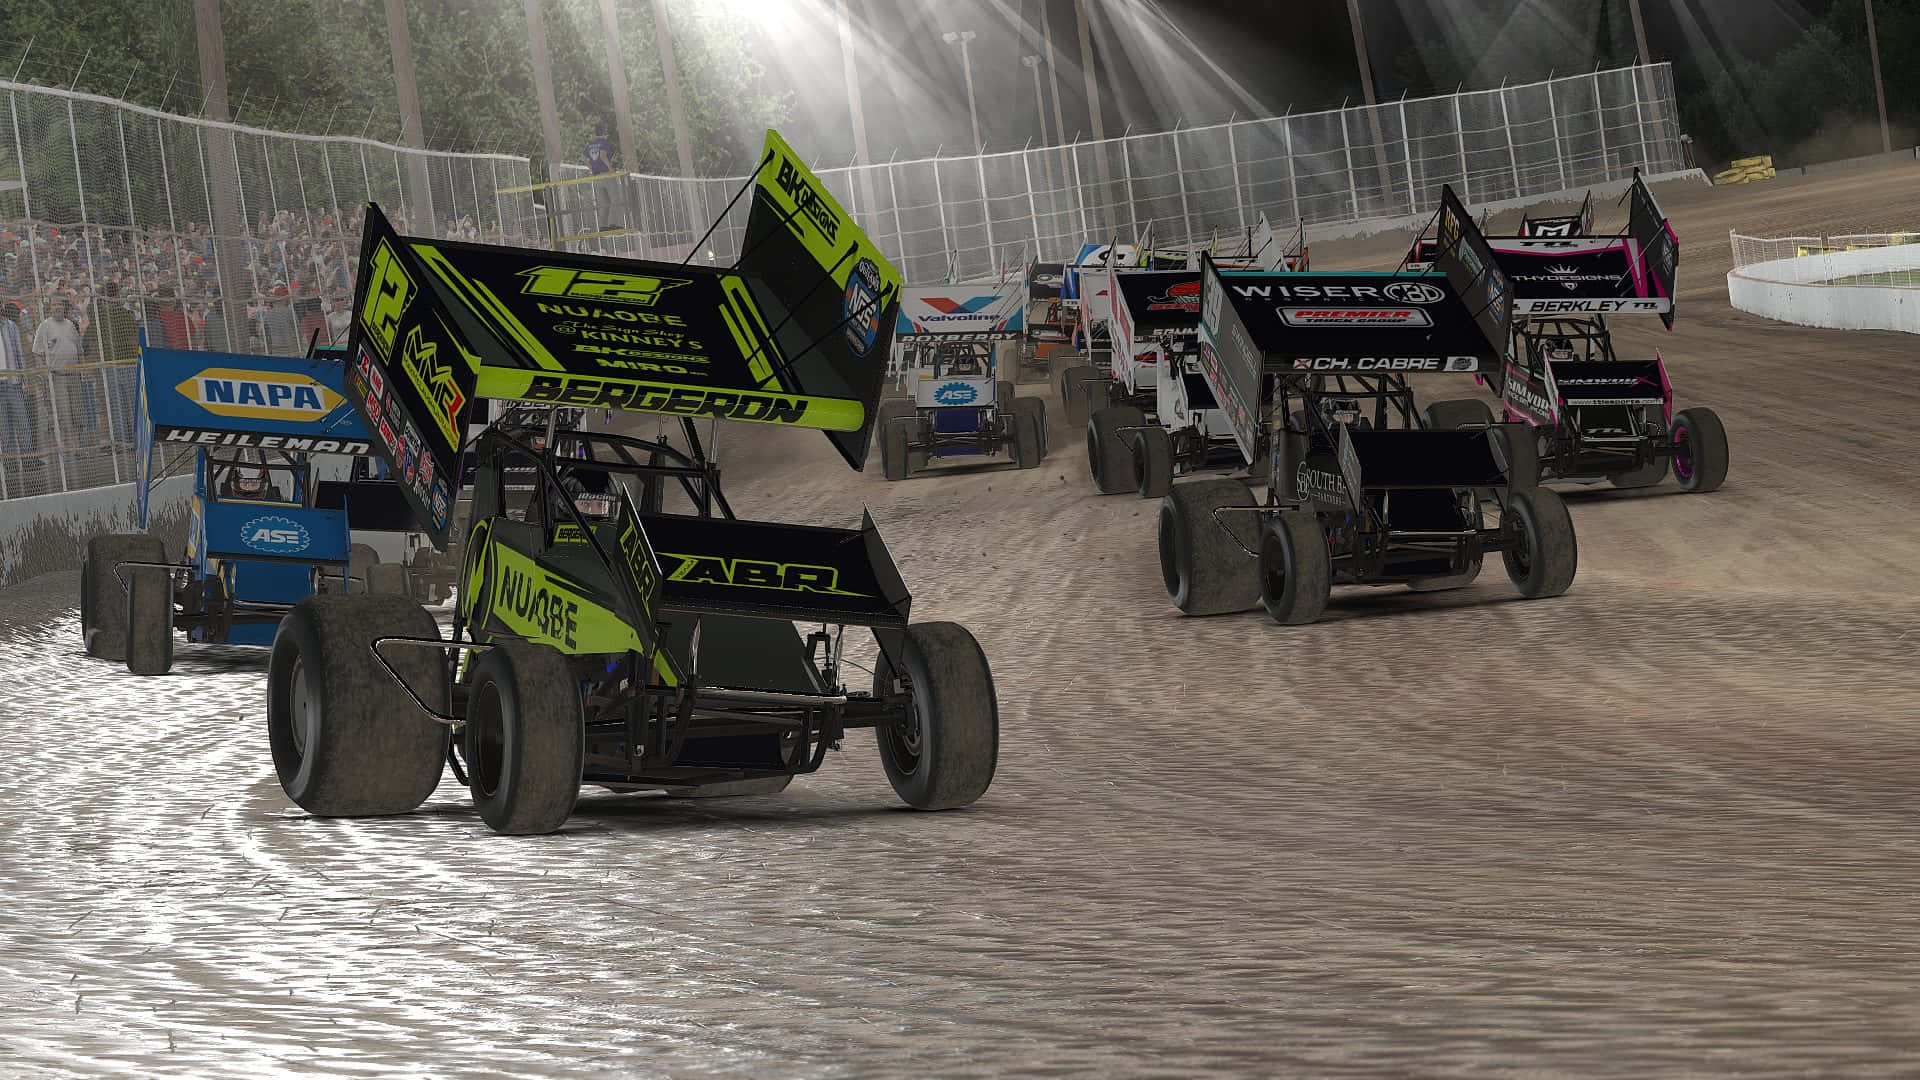 A Group Of Dirt Track Racing Cars Are Racing In The Dirt Wallpaper